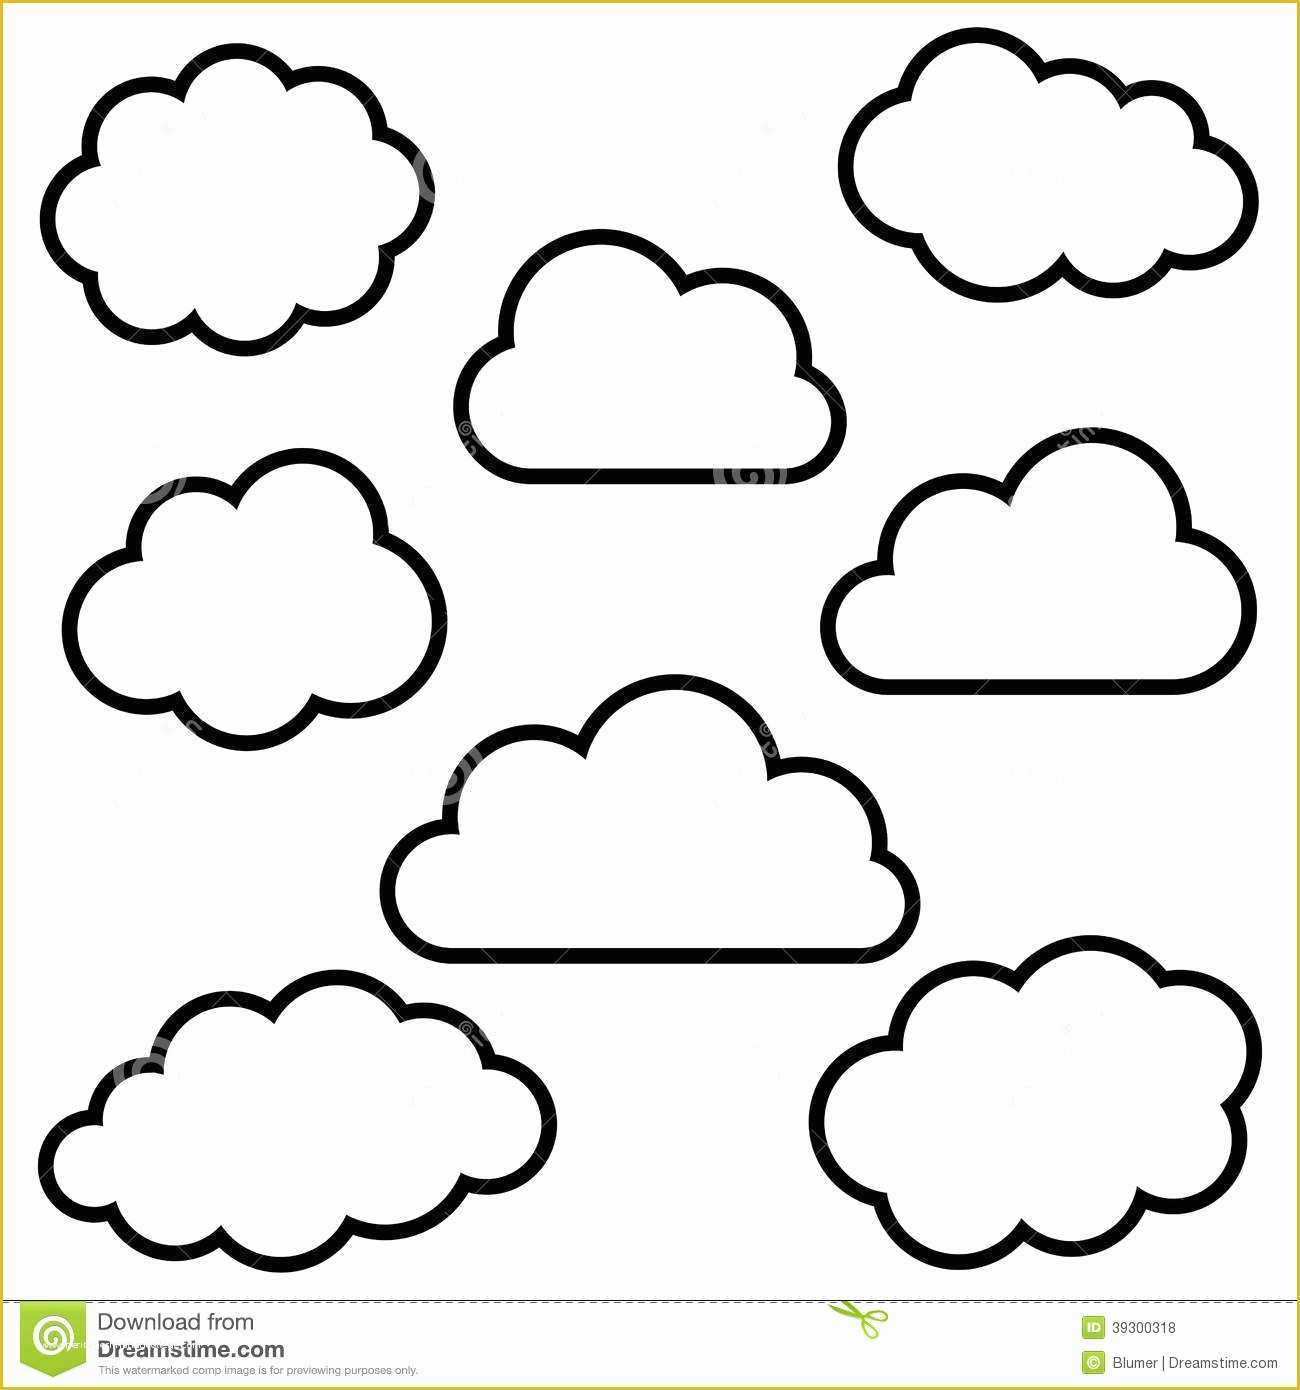 Cloud Template Free Of Clouds Clipart Small Cloud Pencil and In Color Clouds